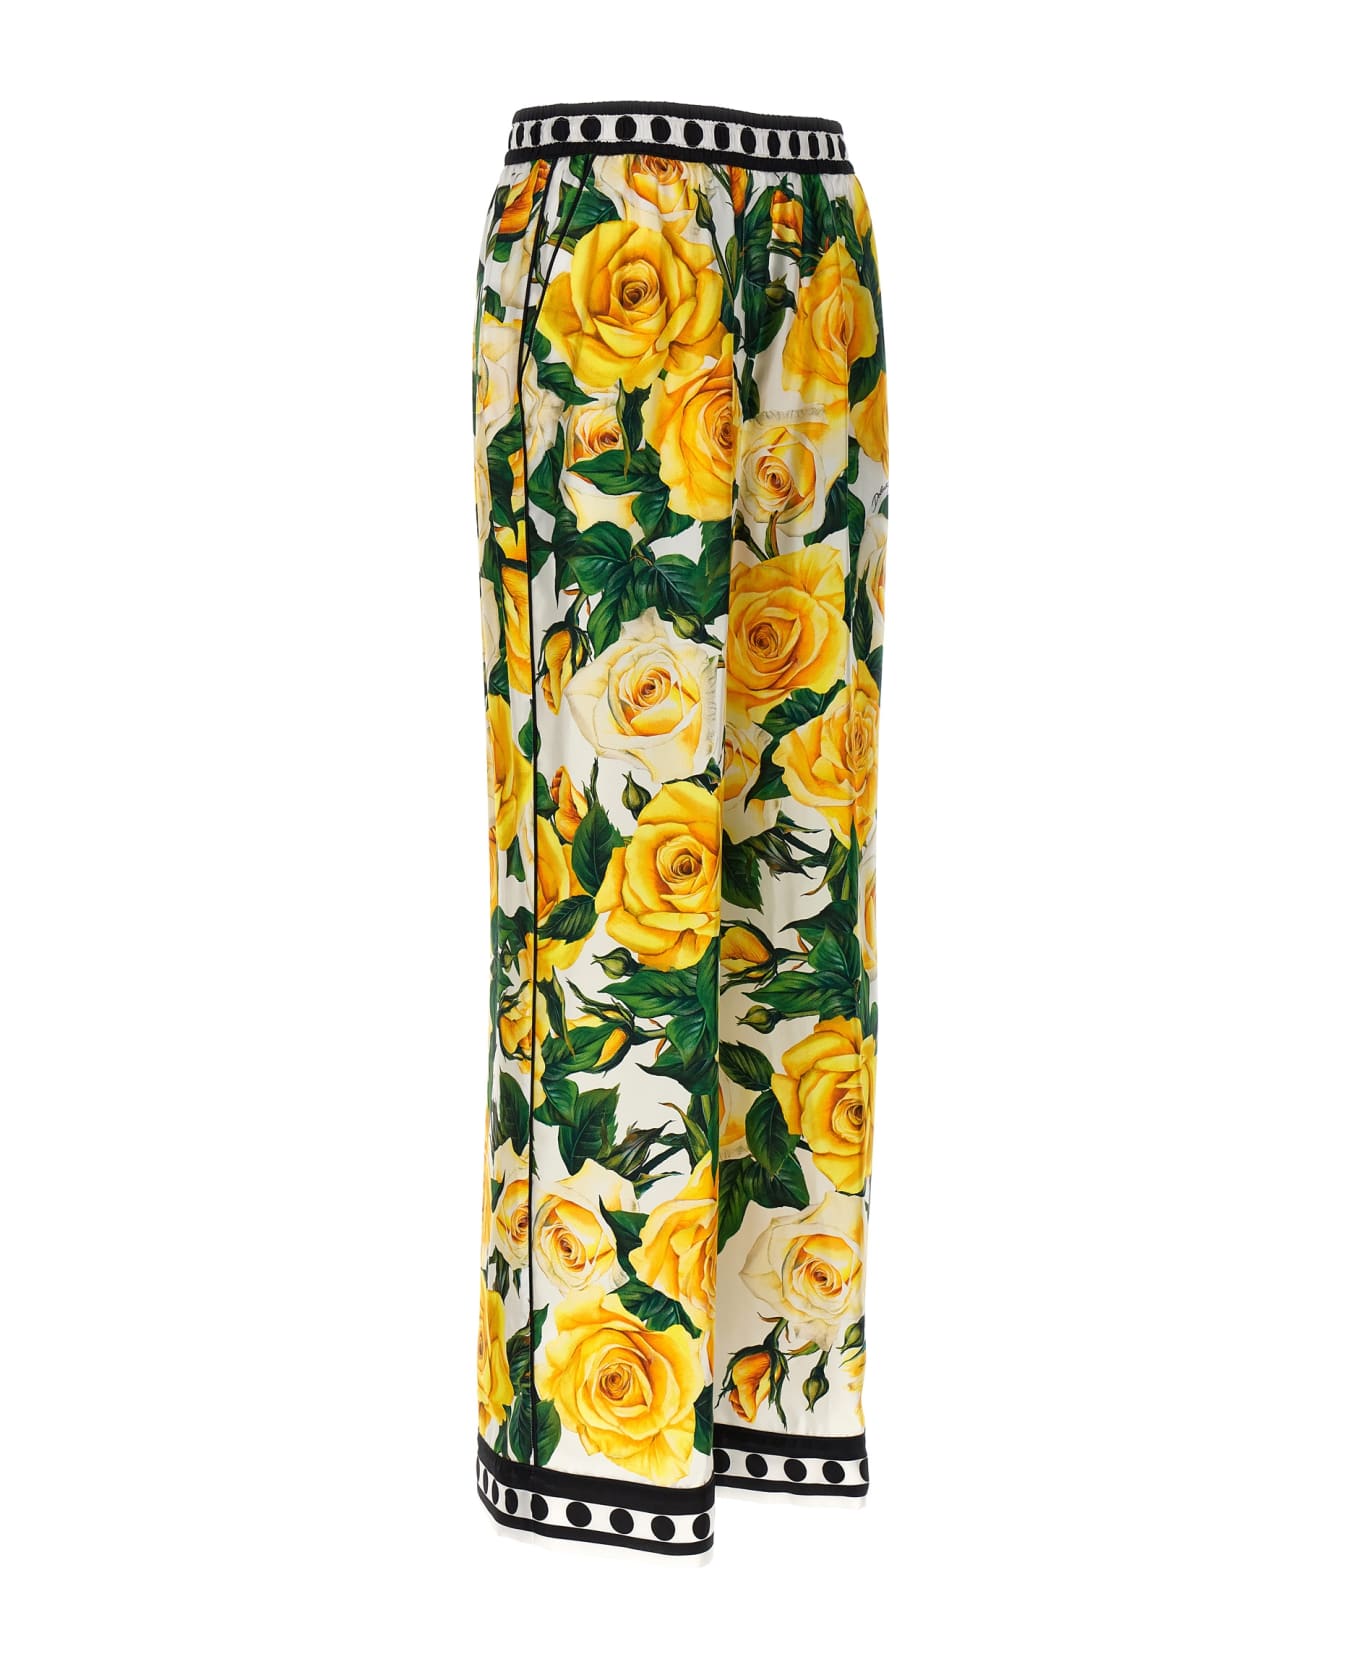 Dolce & Gabbana 'rose Gialle' Trousers - Multicolor ボトムス